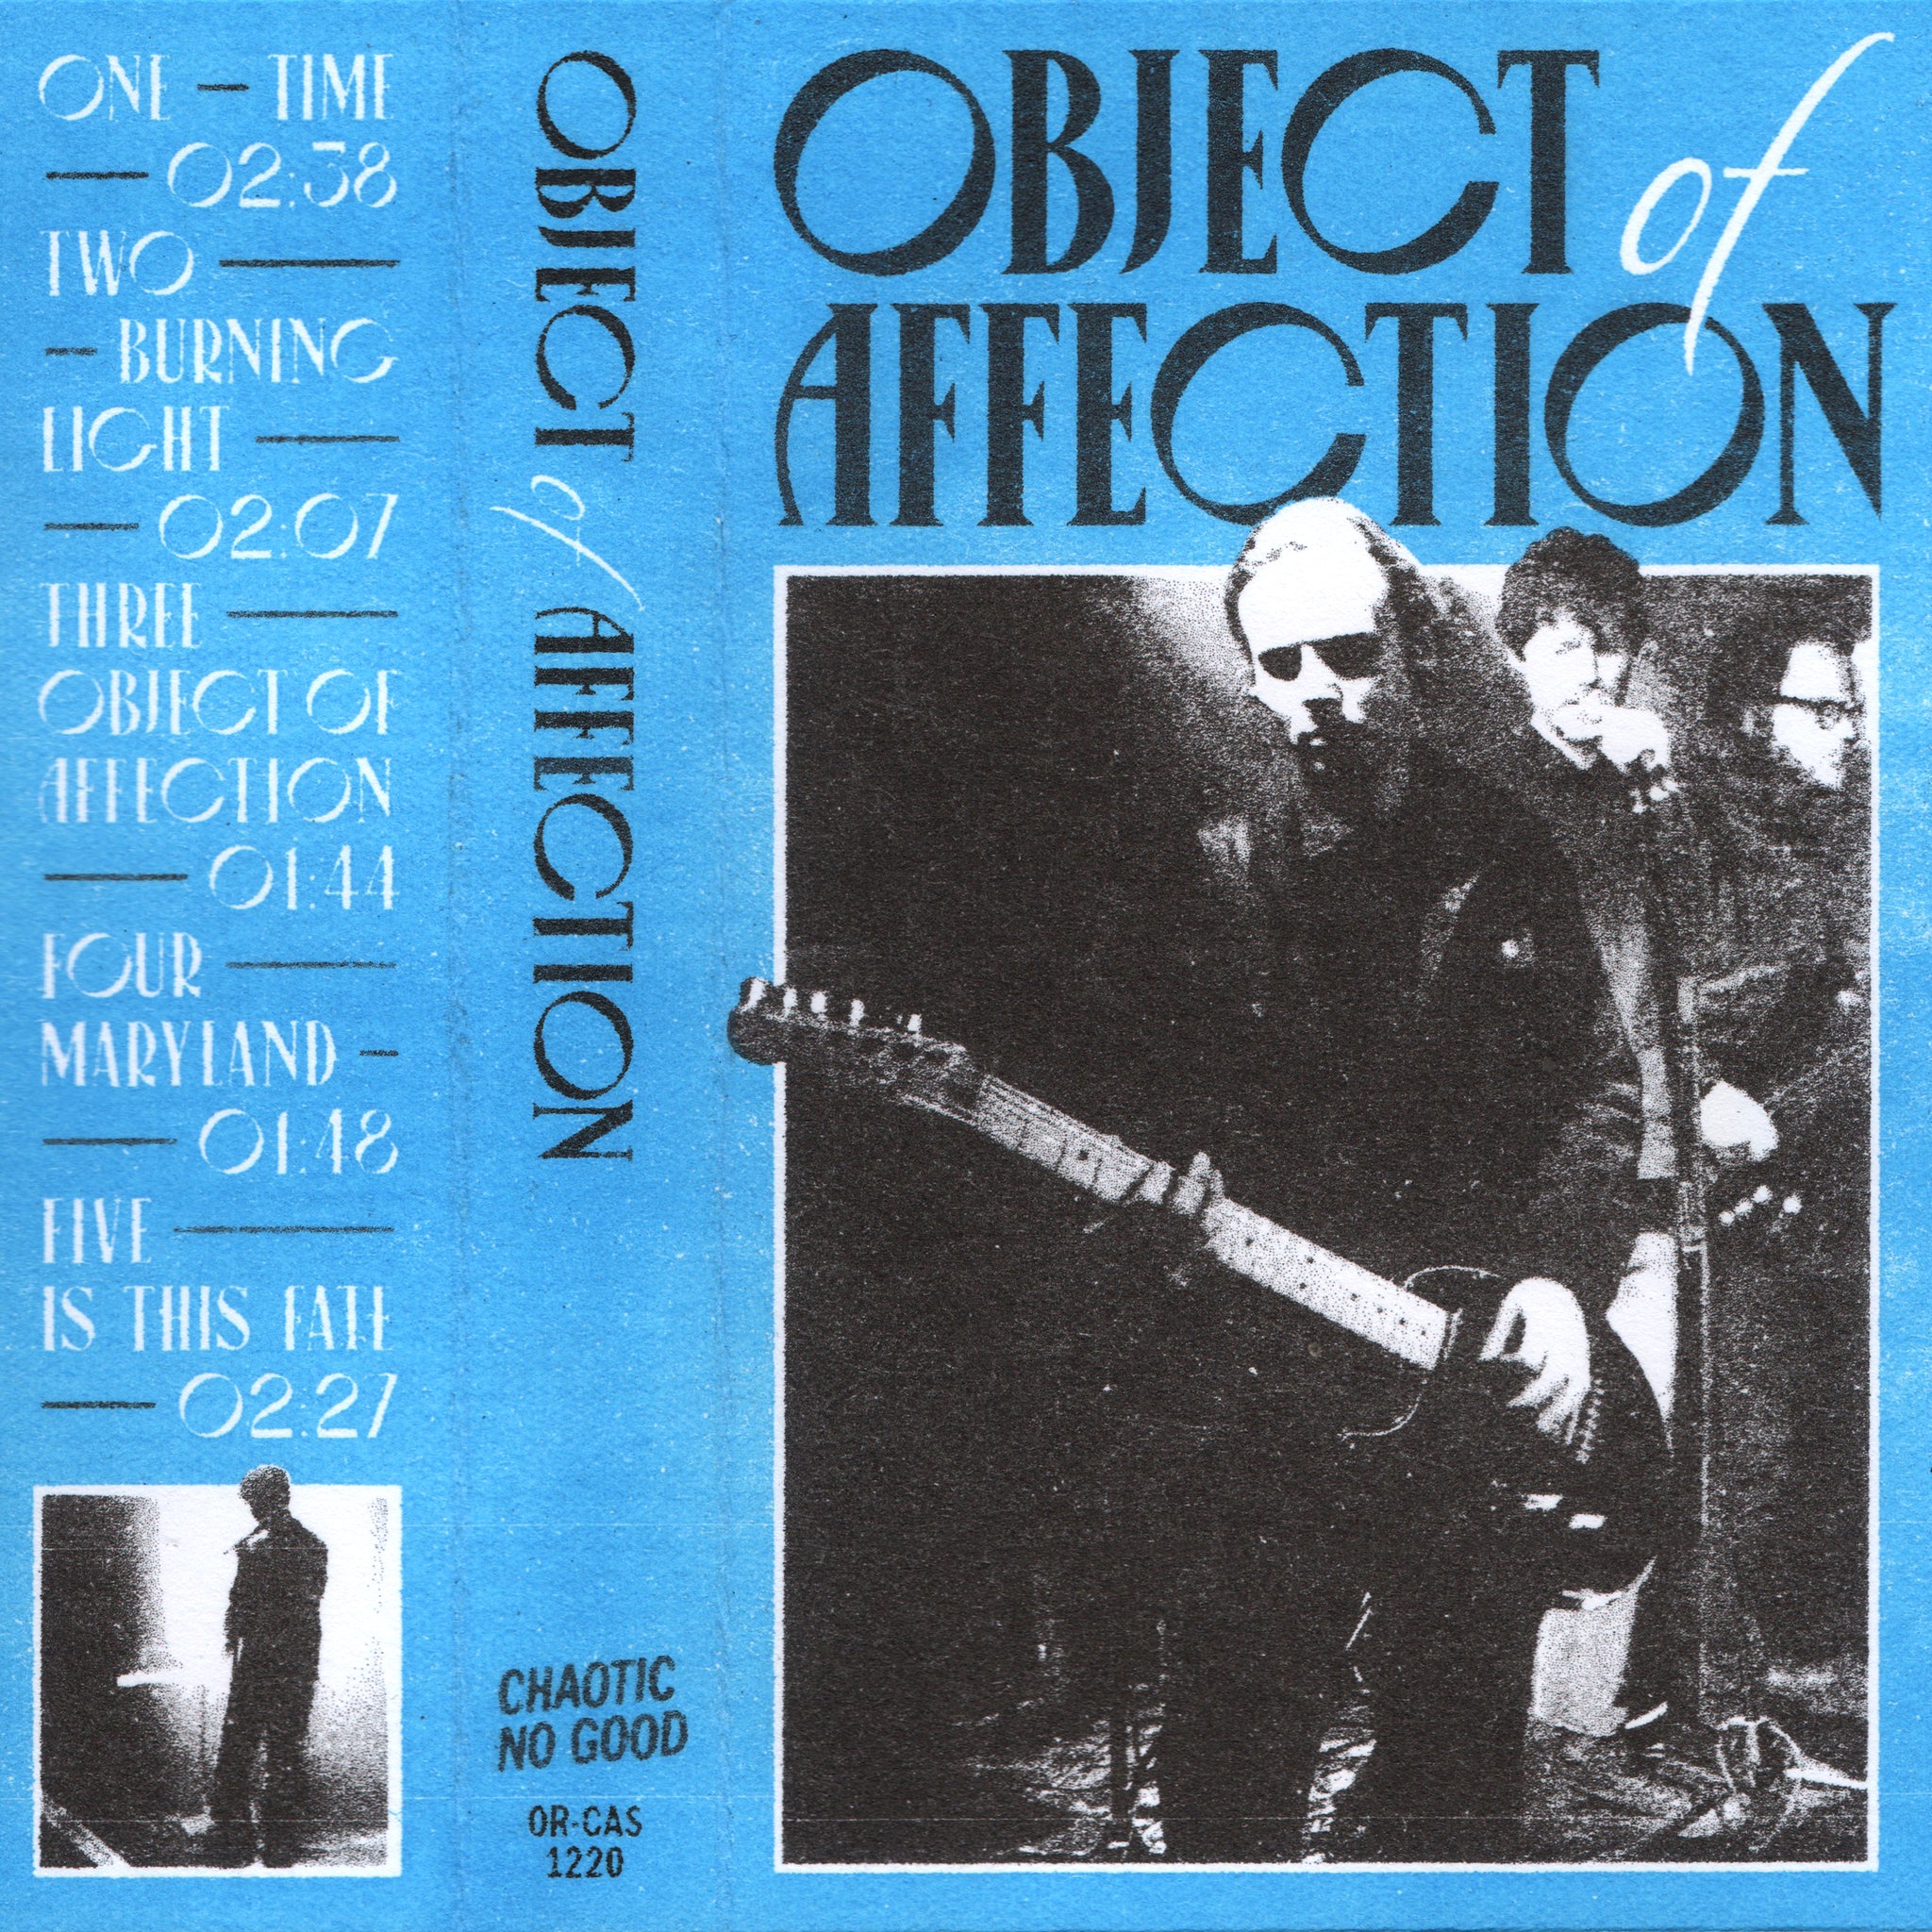 OBJECT OF AFFECTION - OBJECT OF AFFECTION Cassette Tape